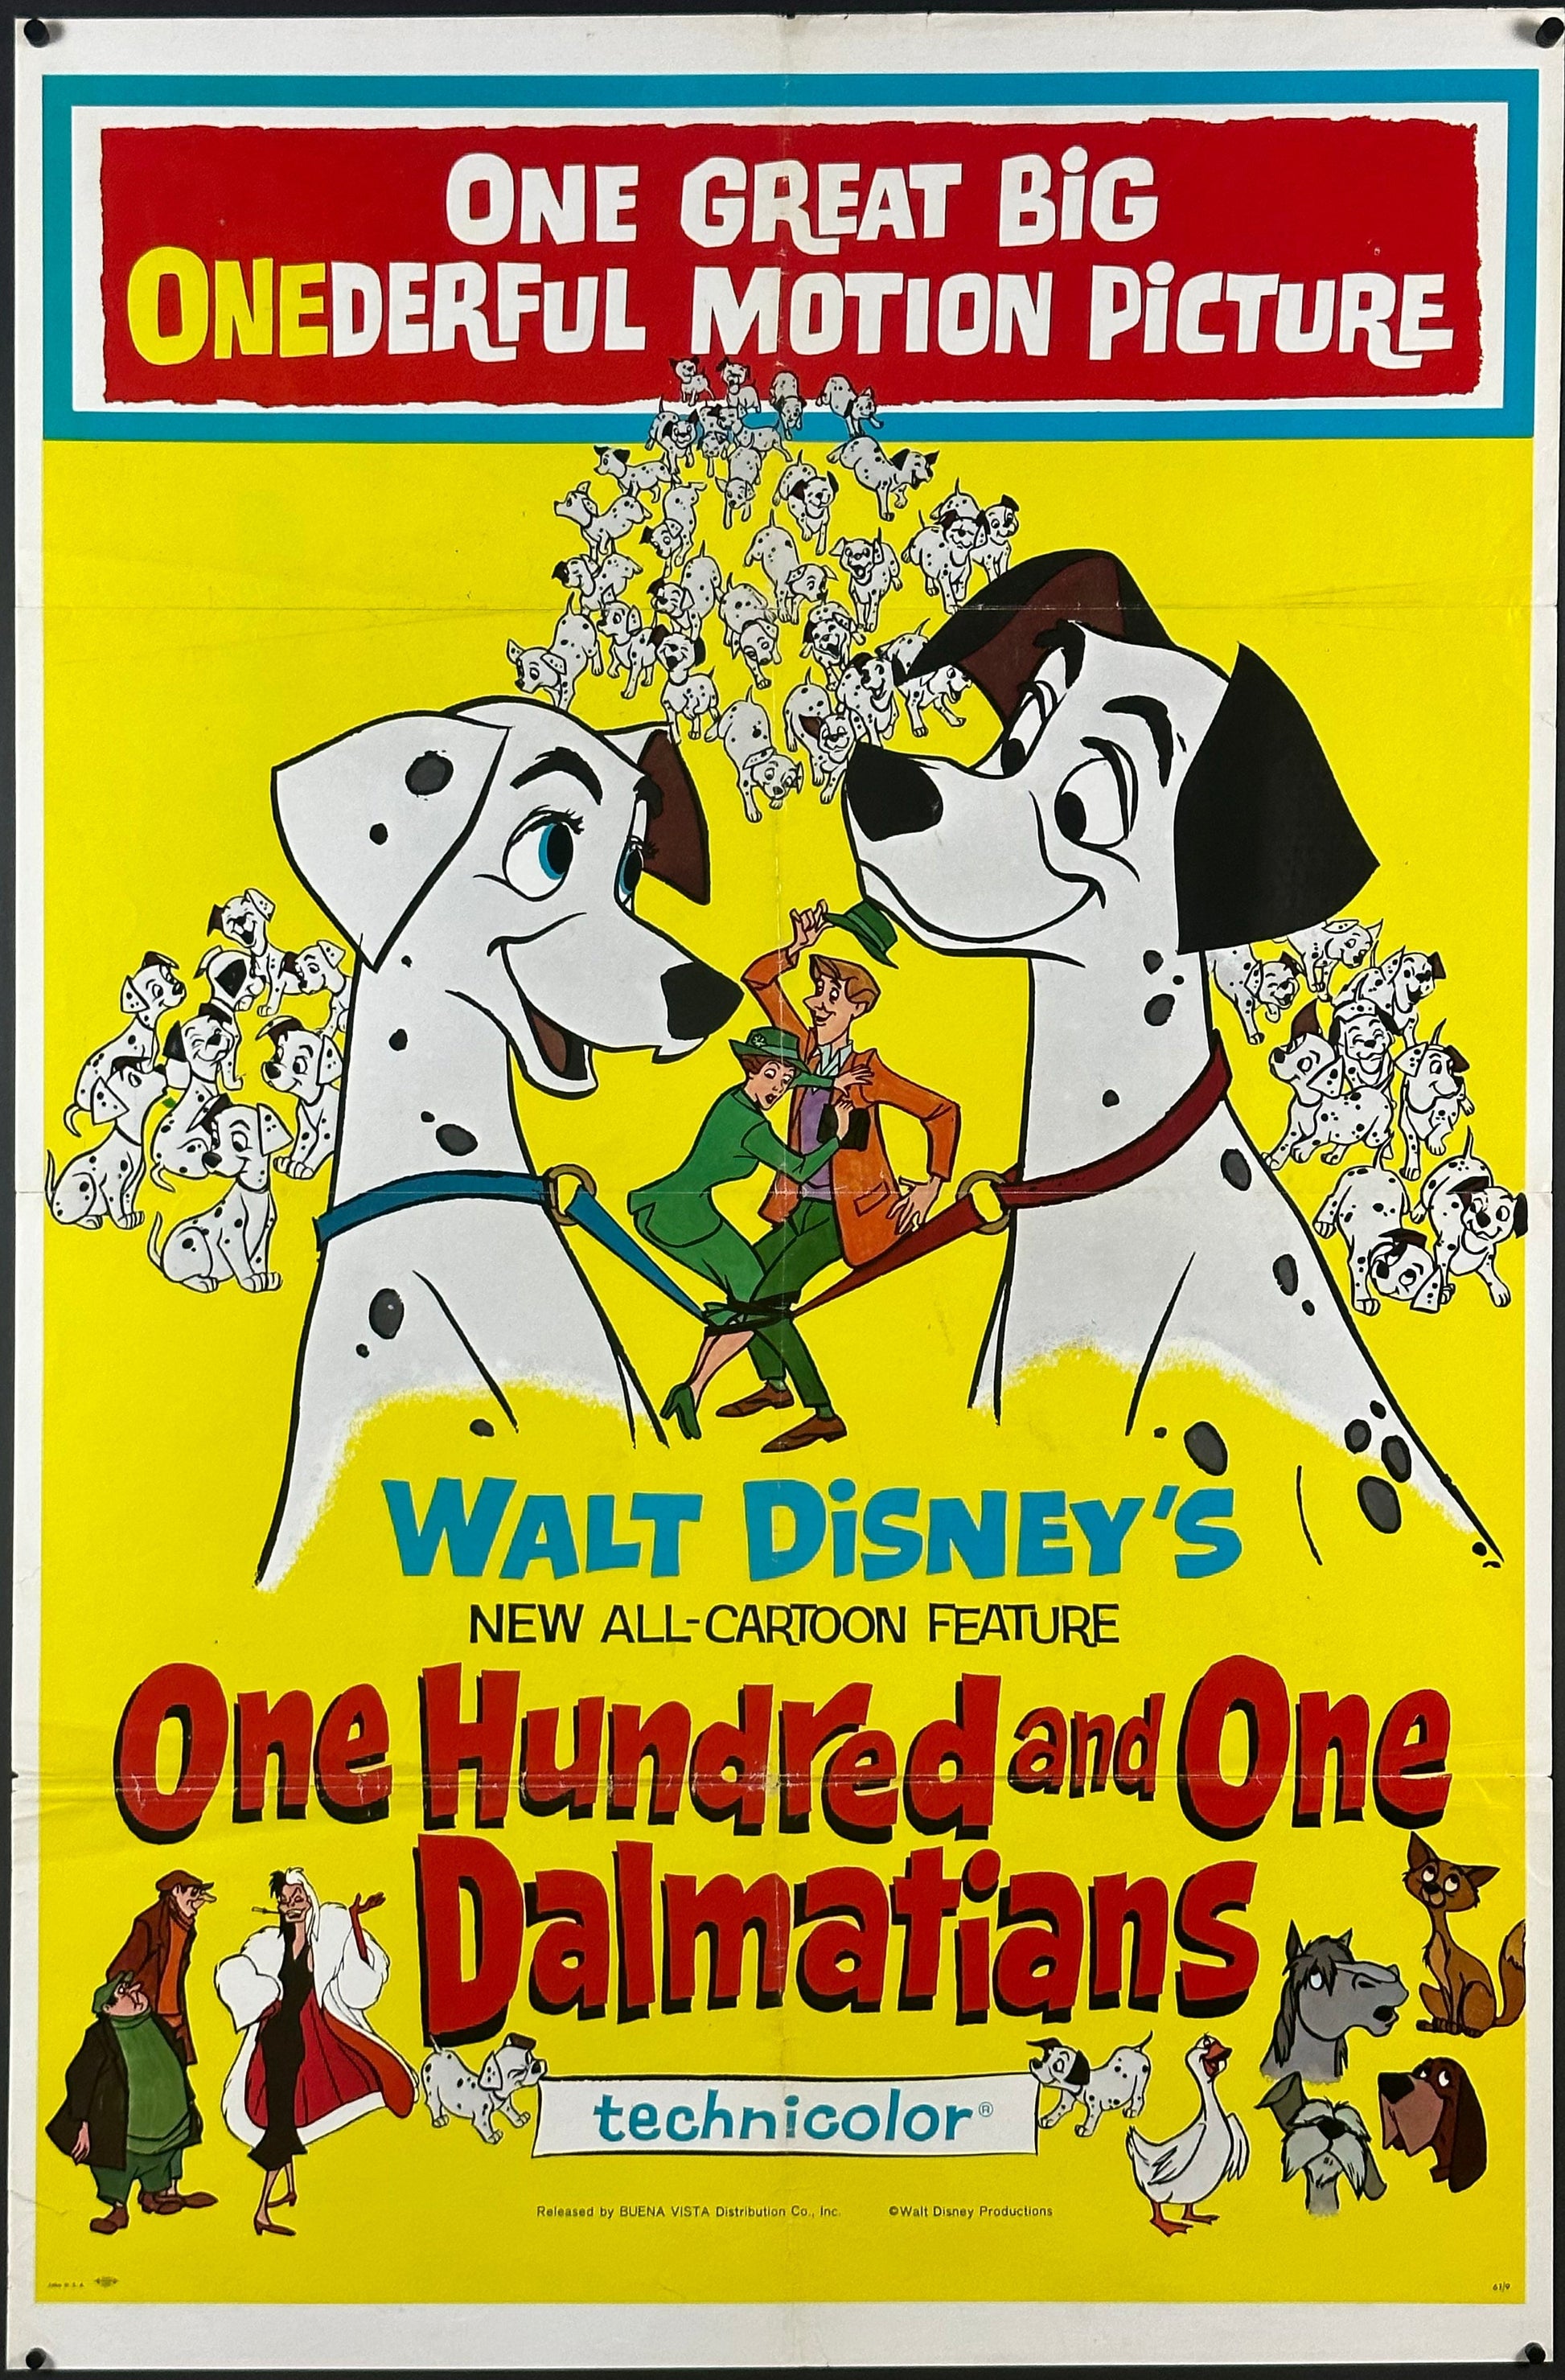 One Hundred And One Dalmatians - posterpalace.com